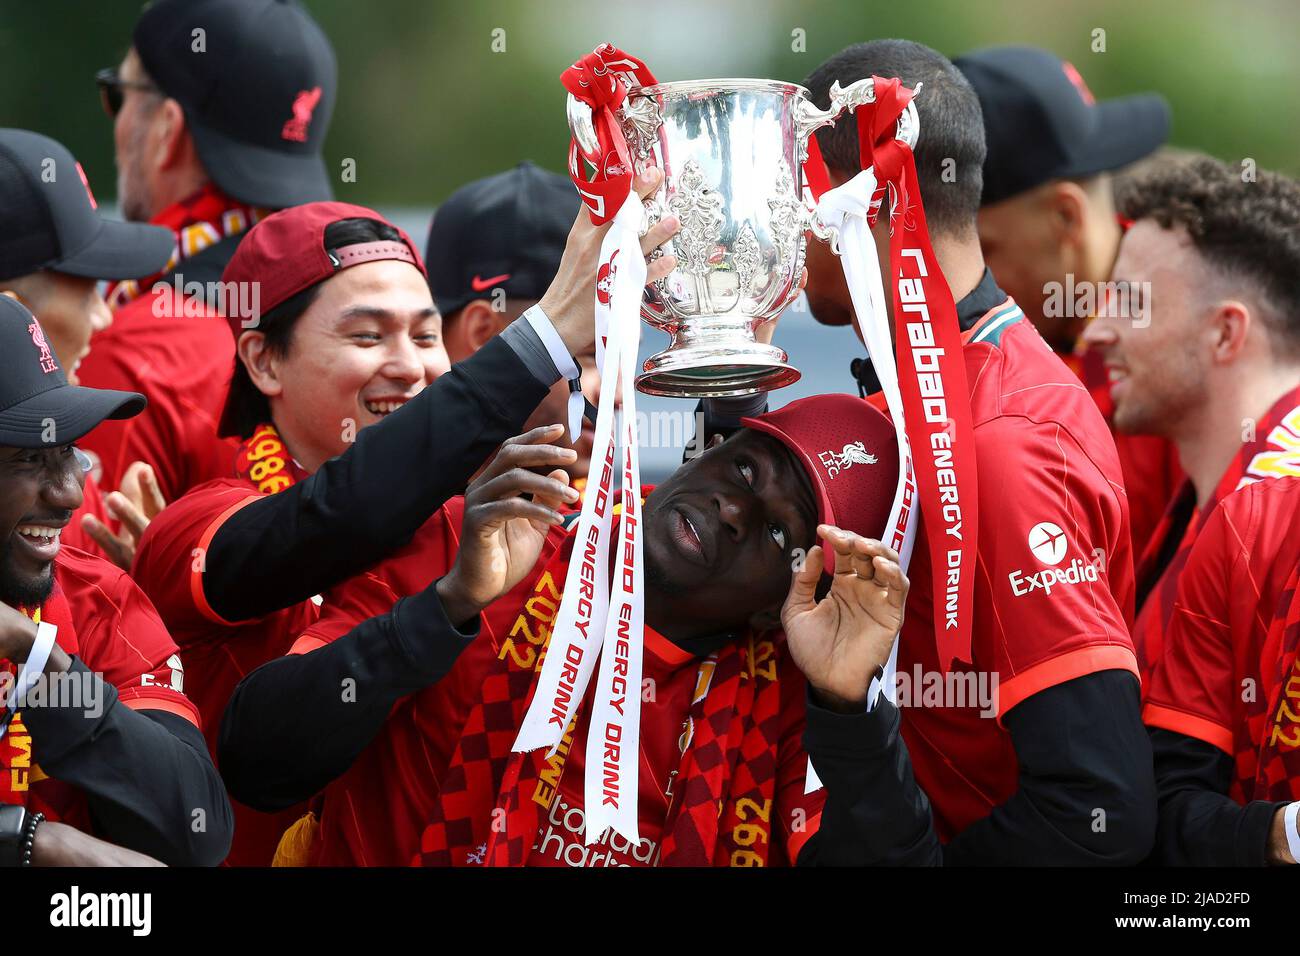 Liverpool, UK. 29th May, 2022. Takumi Minamino of Liverpool puts the Carabao Cup on the head of his teammate Sadio Mane of Liverpool. Liverpool Football Club victory parade in Liverpool on Sunday 29th May 2022. Liverpool FC celebrate this season's mens and women's teams achievements with an open top bus parade around Liverpool. Editorial use only. pic by Chris Stading/Andrew Orchard sports photography/Alamy Live news Credit: Andrew Orchard sports photography/Alamy Live News Stock Photo